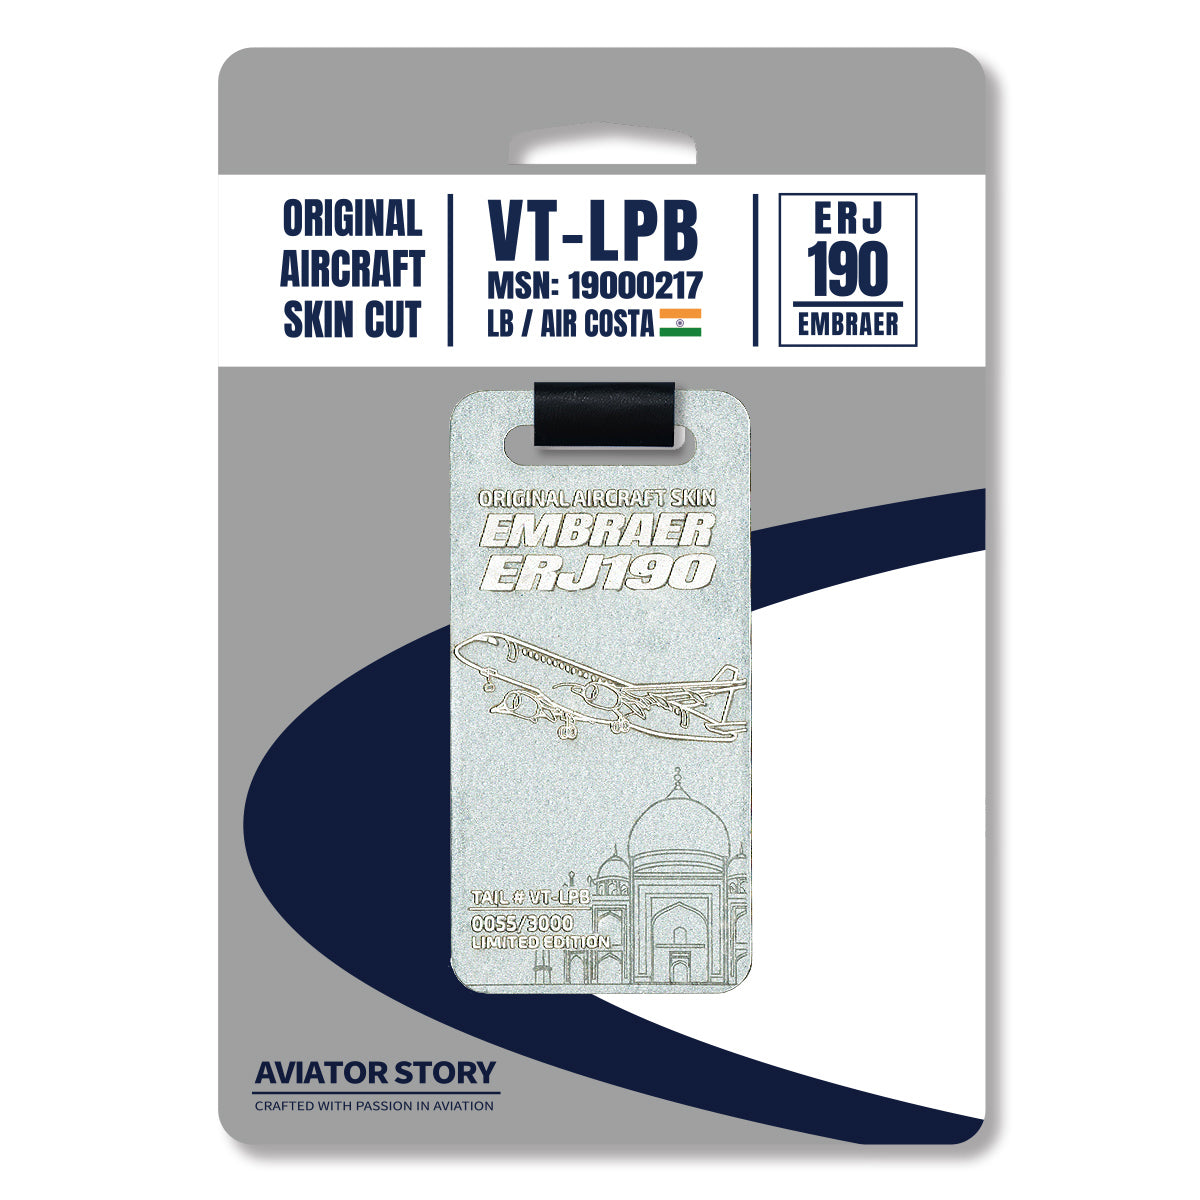  Abort The Supreme Court Luggage Tags for Travel Pu